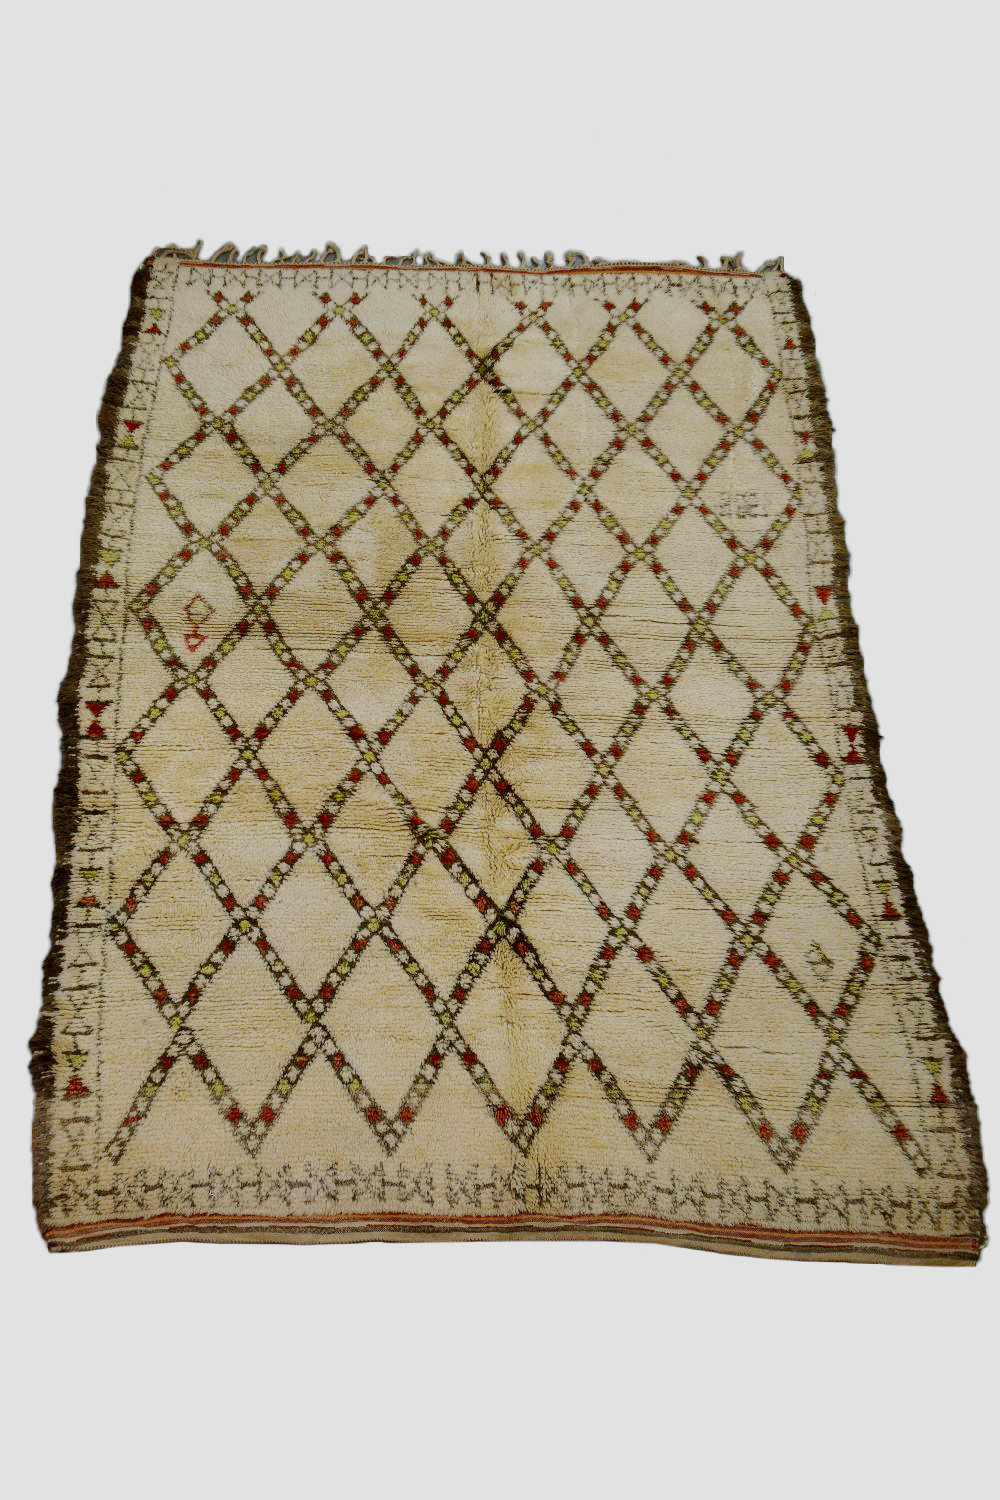 Good Beni Ouarain carpet of minimilast design, Middle Atlas, Morocco, dated 1988, 9ft. 6in. X 6ft.